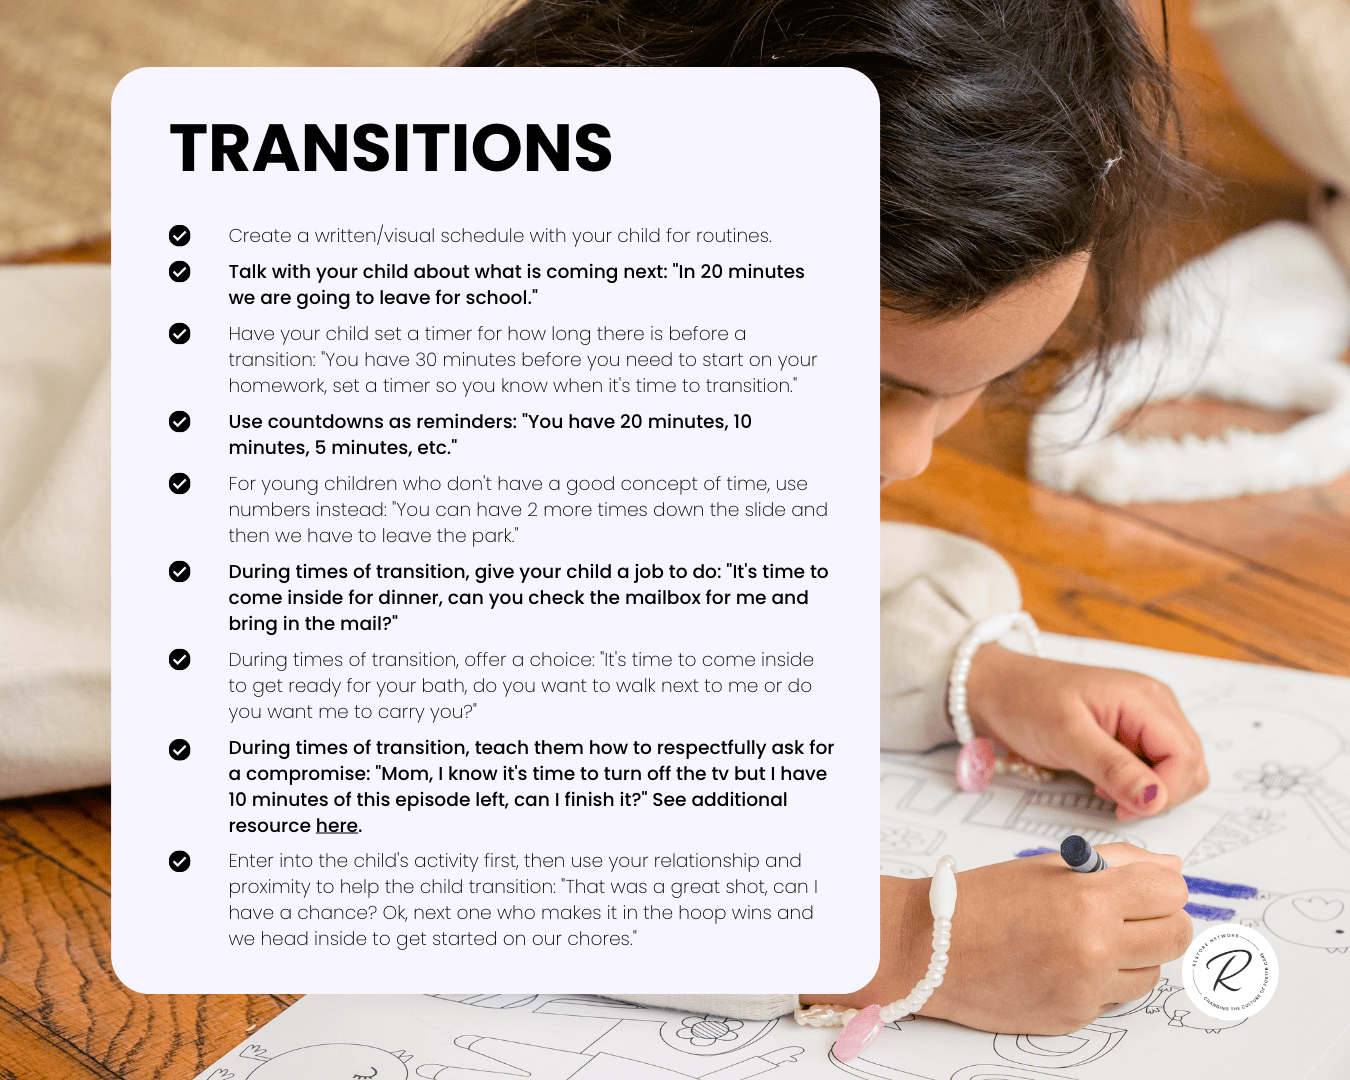 Transitions tips ()